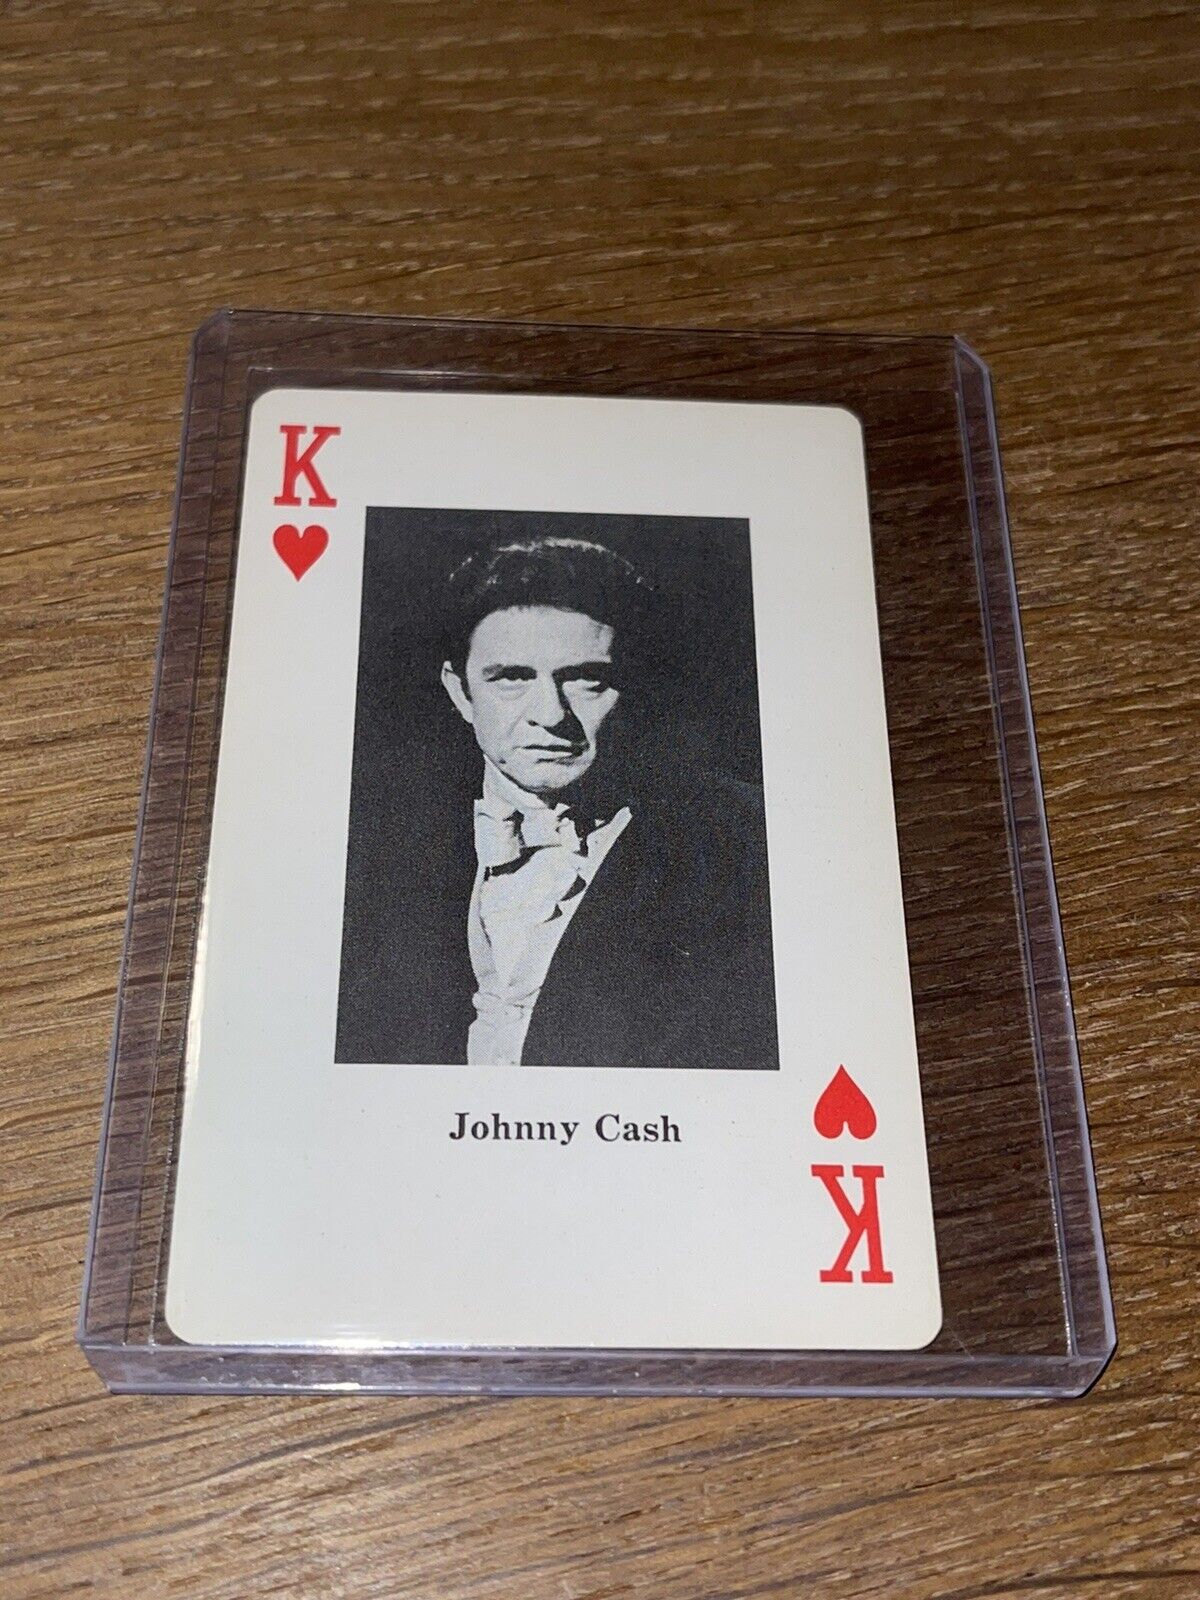 EXTREMELY RARE 1970 HEATHER COUNTRY MUSIC JOHNNY CASH KING OF HEARTS MUSIC CARD